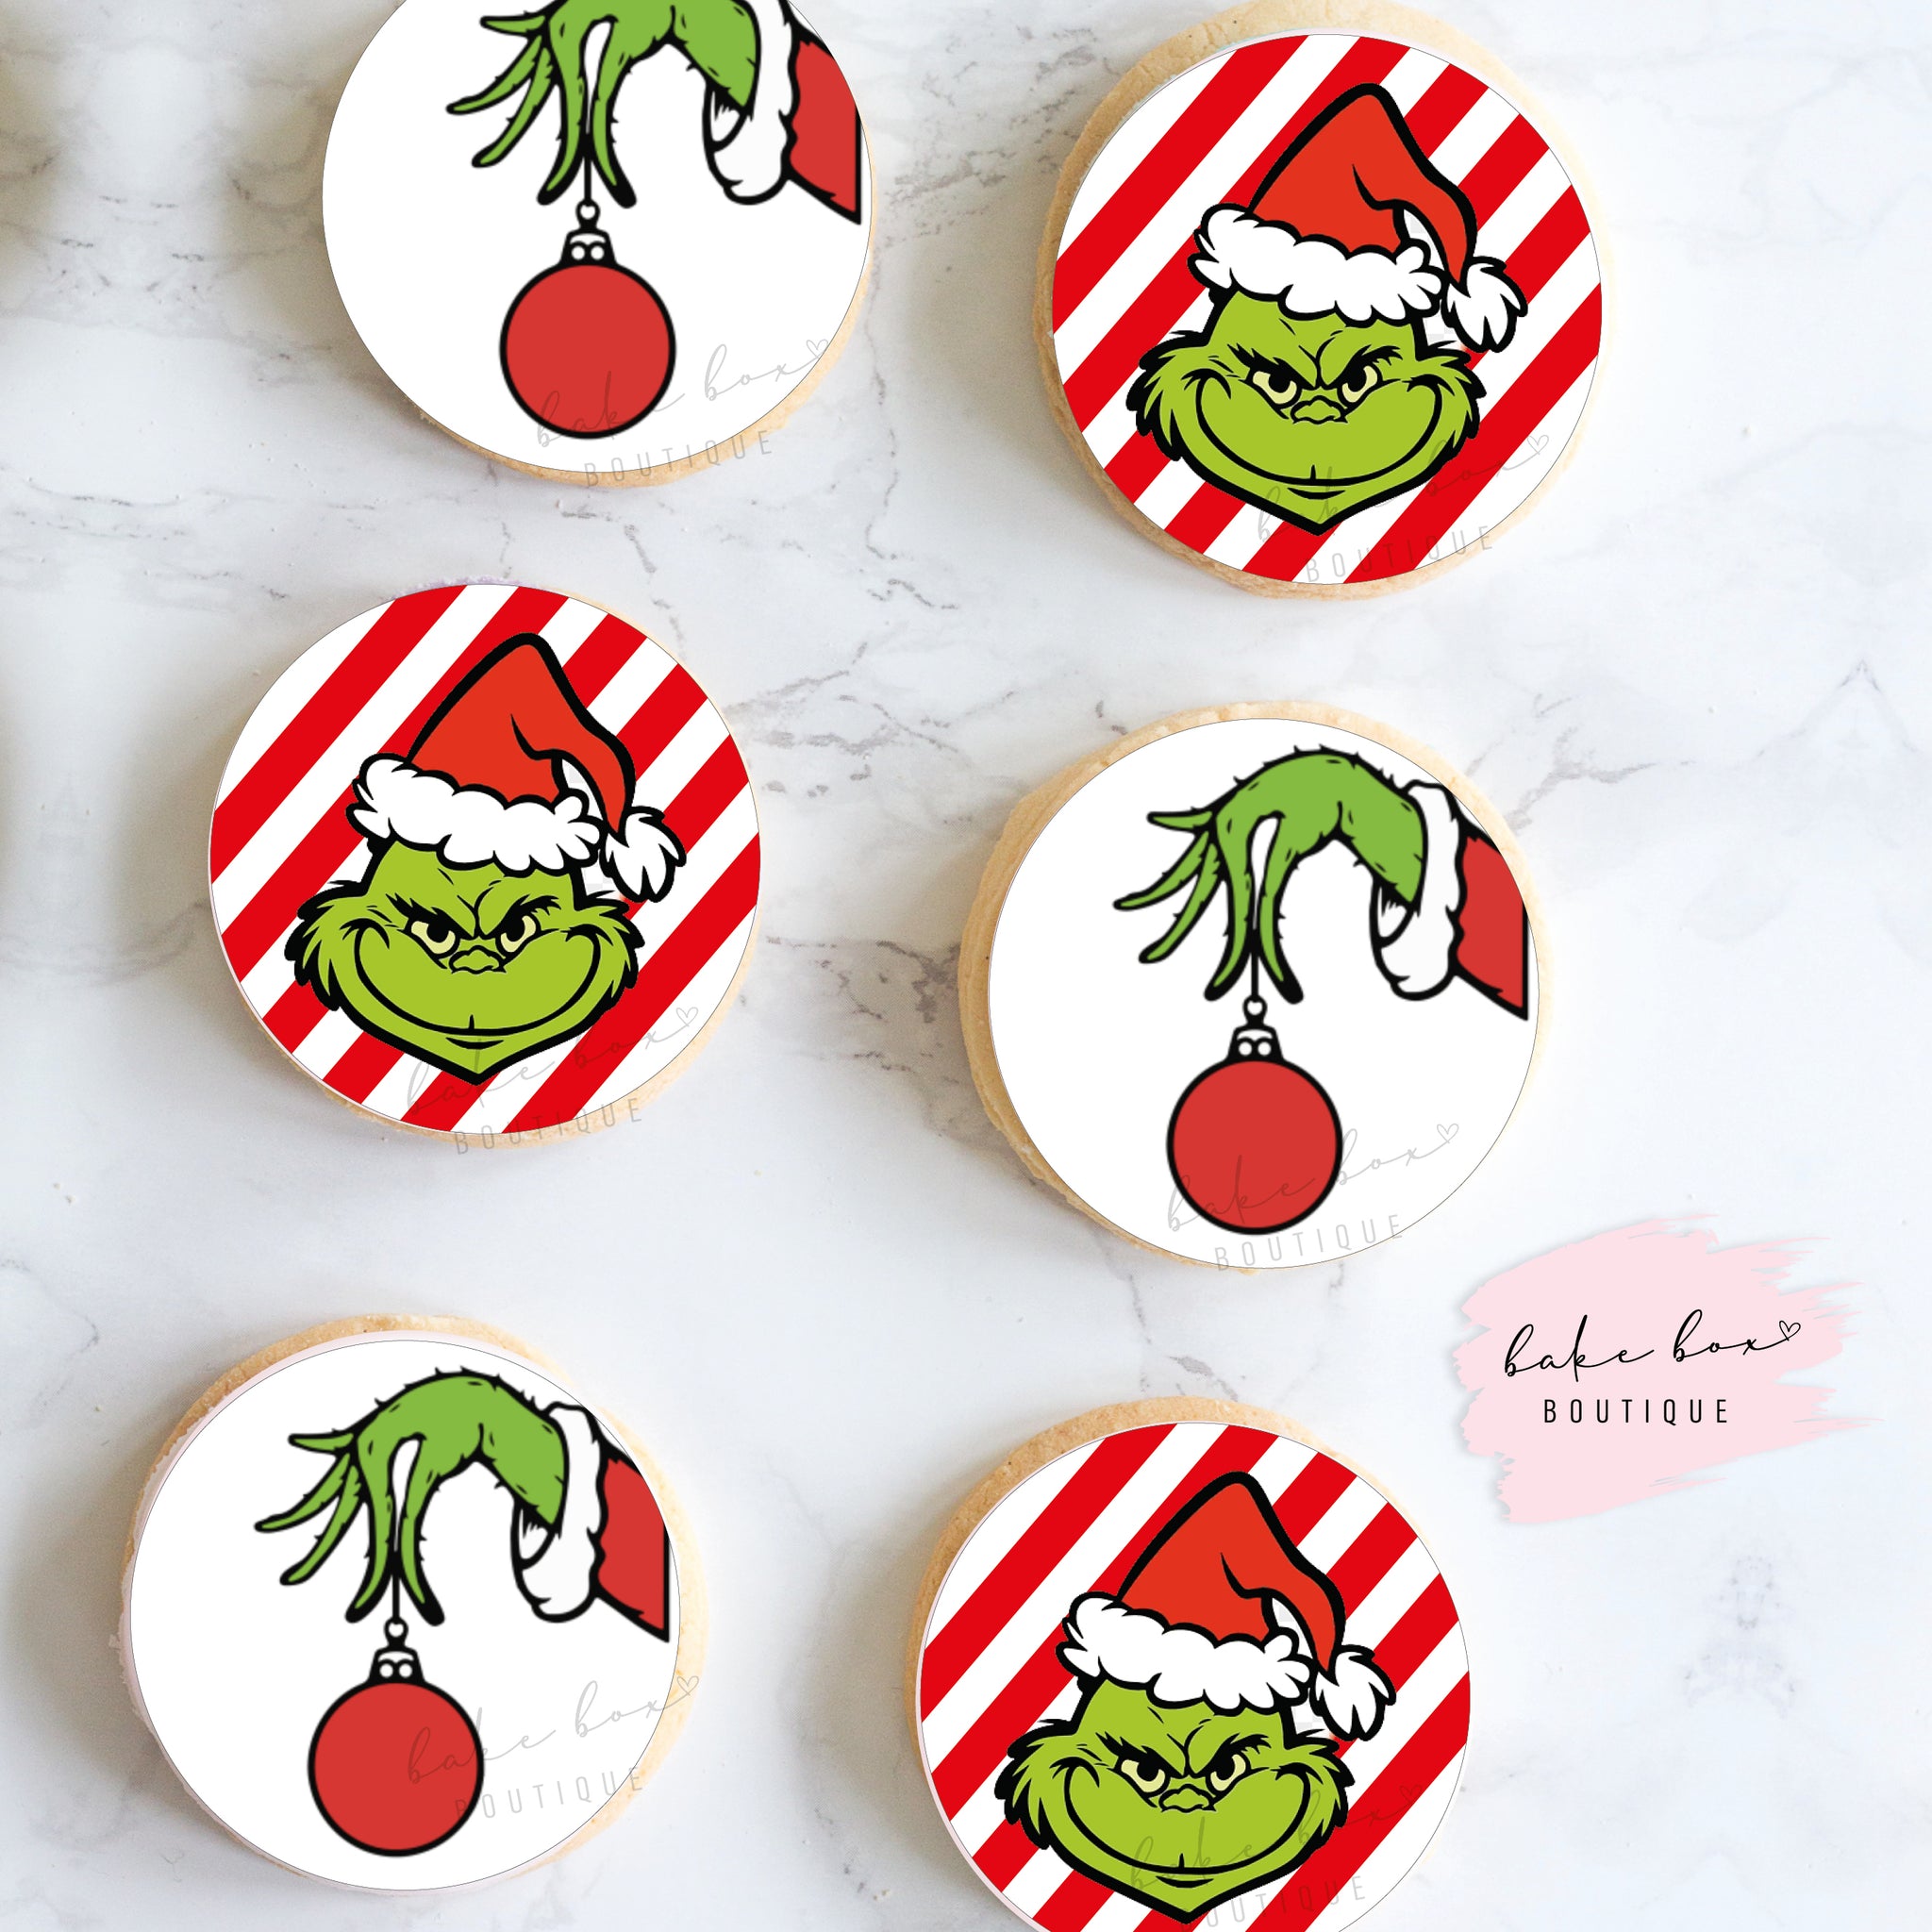 EDIBLE TOPPERS THE GRINCH Bake Box Boutique